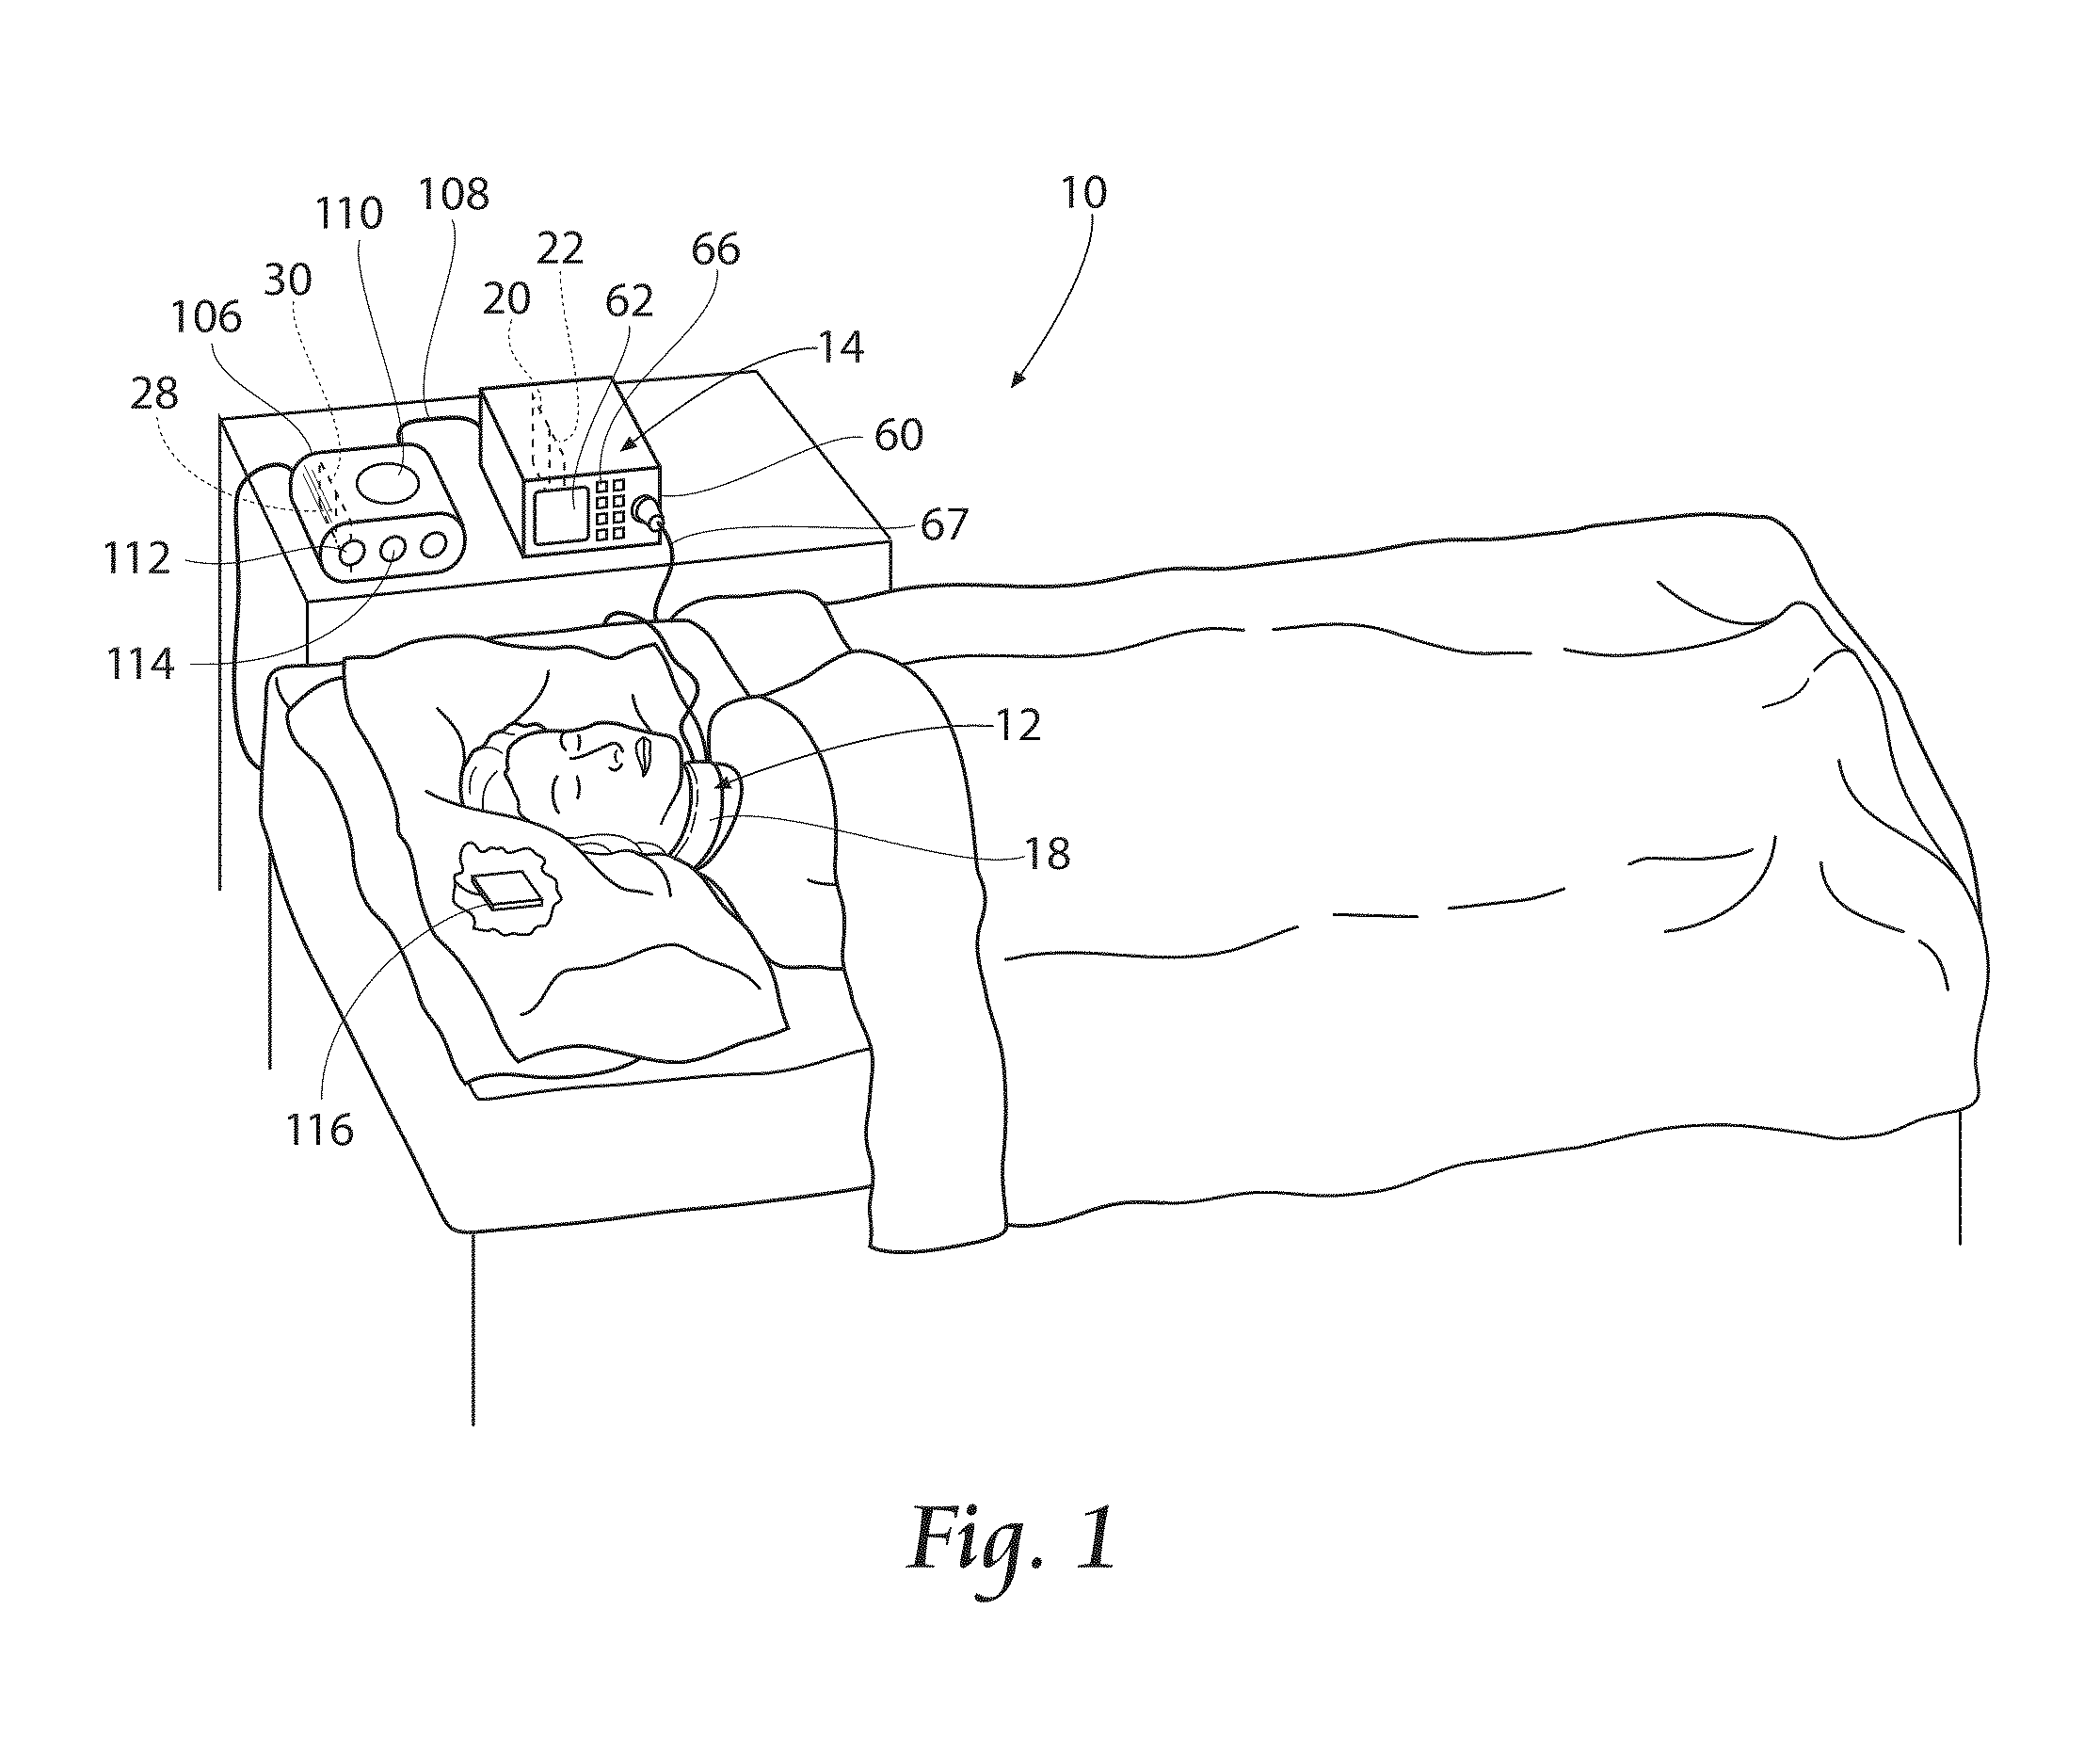 Devices, systems, and methods for monitoring, analyzing, and/or adjusting sleep conditions